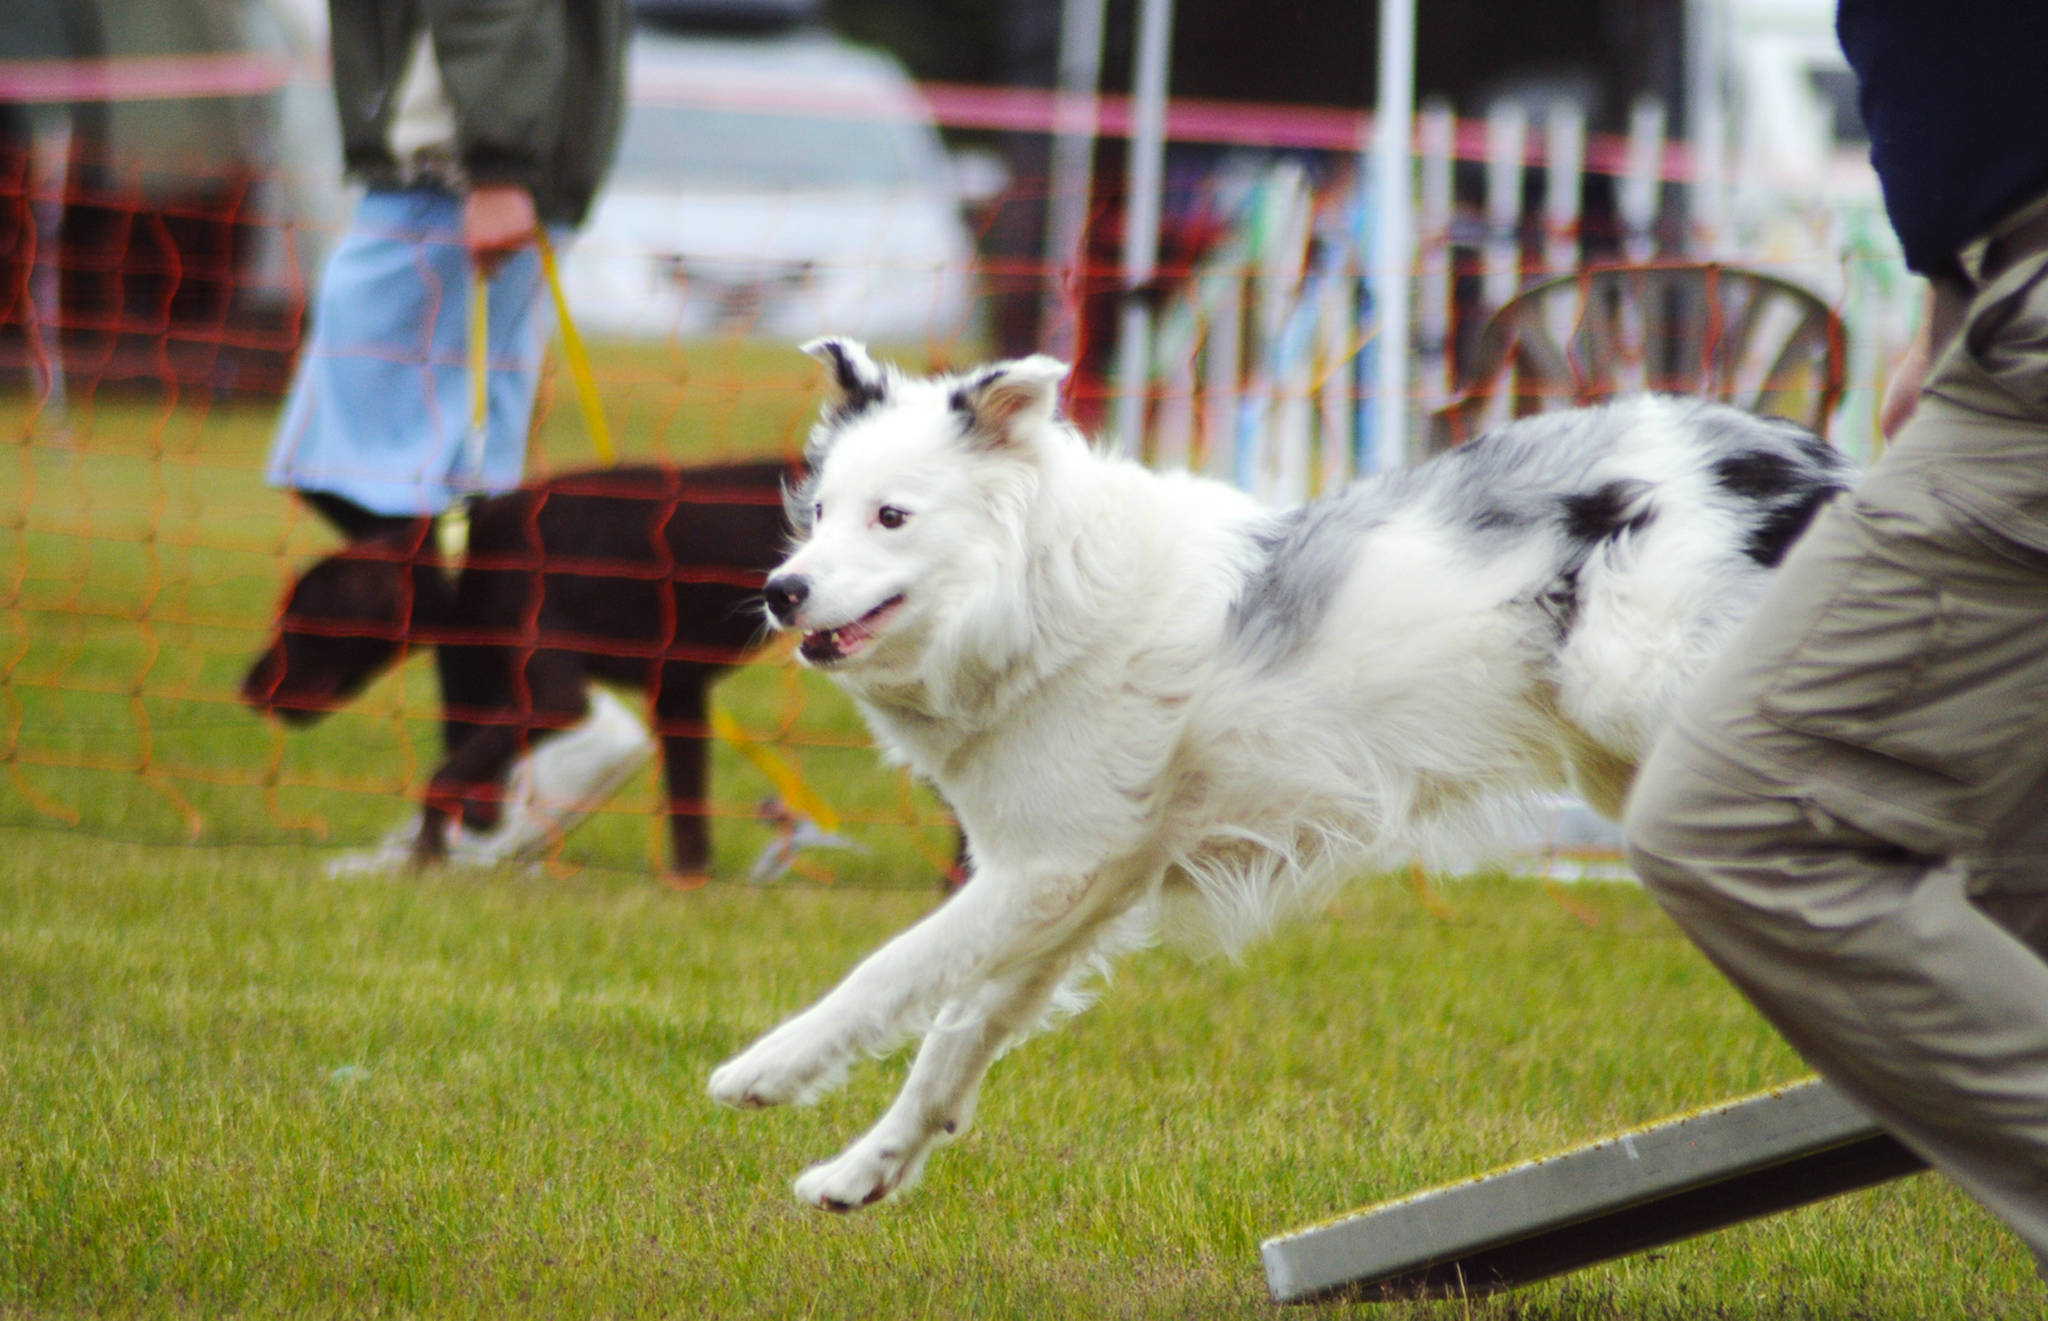 ABOVE: A sheltie hangs out with trainers before competing in the Kenai Kennel Club’s annual dog show, obedience and agility trials on Saturday in Soldotna. Dog owners come from all over the state to take part in the events each year.                                 TOP: A dog jumps off a ramp during an agility test at the Kenai Kennel Club’s annual dog show, obedience and agility trials on Saturday in Soldotna. (Photos by Elizabeth Earl/Peninsula Clarion)